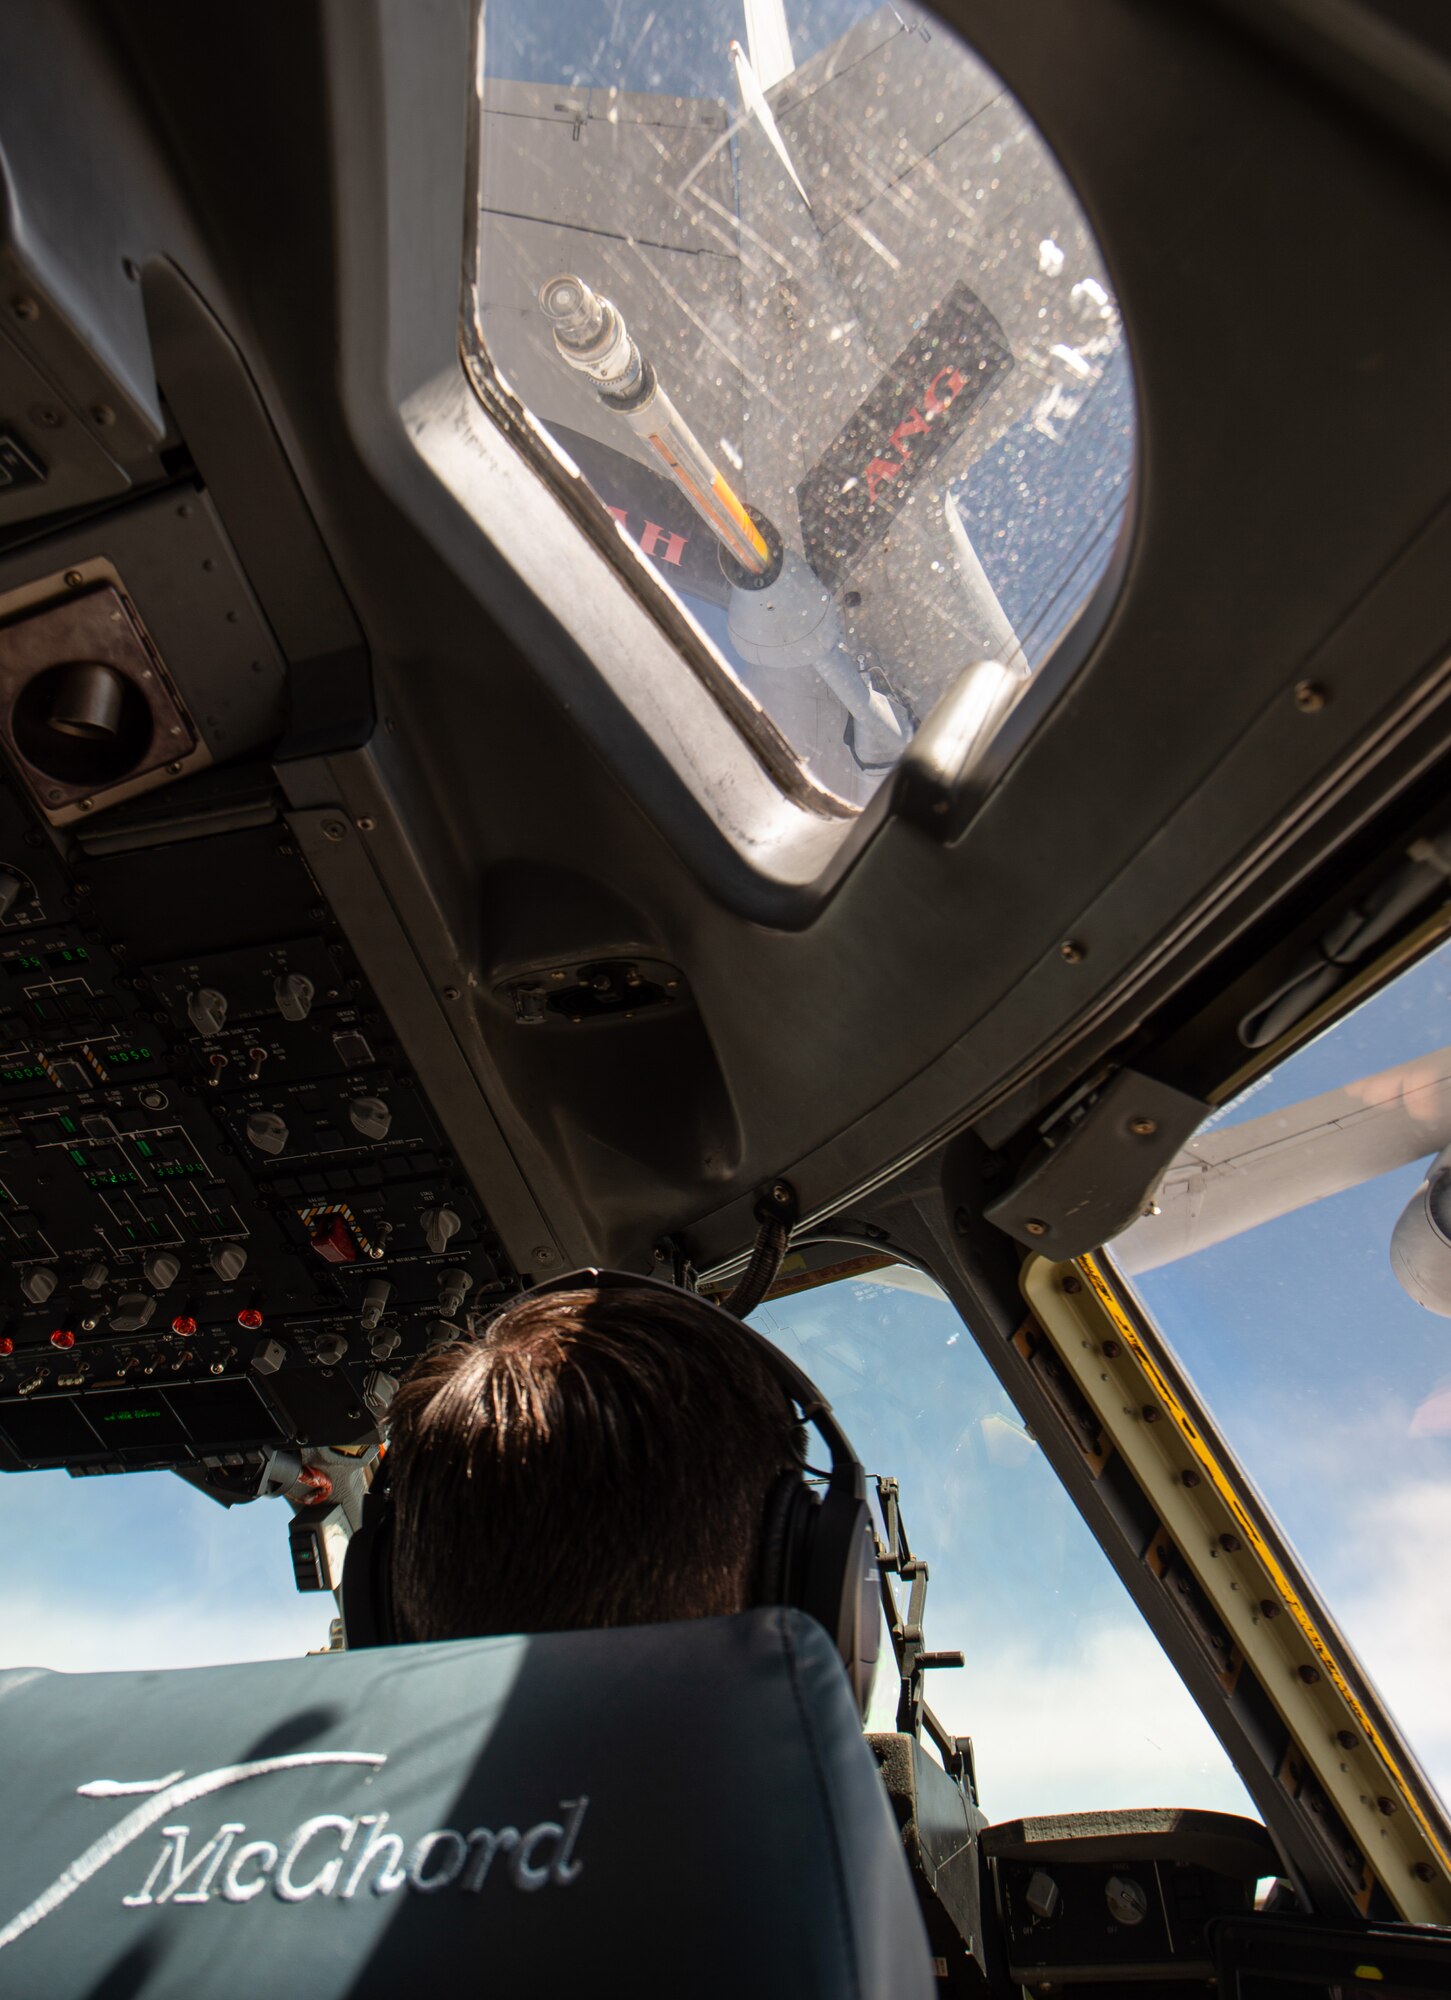 Capt. Shelby Foster, 7th Airlift Squadron (AS) pilot, flies a C-17 Globemaster III assigned to Joint Base Lewis-McChord, Wash., during an air refueling training sortie near Salt Lake City, Utah, July 27, 2020. The 7th AS is testing a new training program to see if it is a viable option for C-17 bases Air Mobility Command-wide. (U.S. Air Force photo by Senior Airman Tryphena Mayhugh)